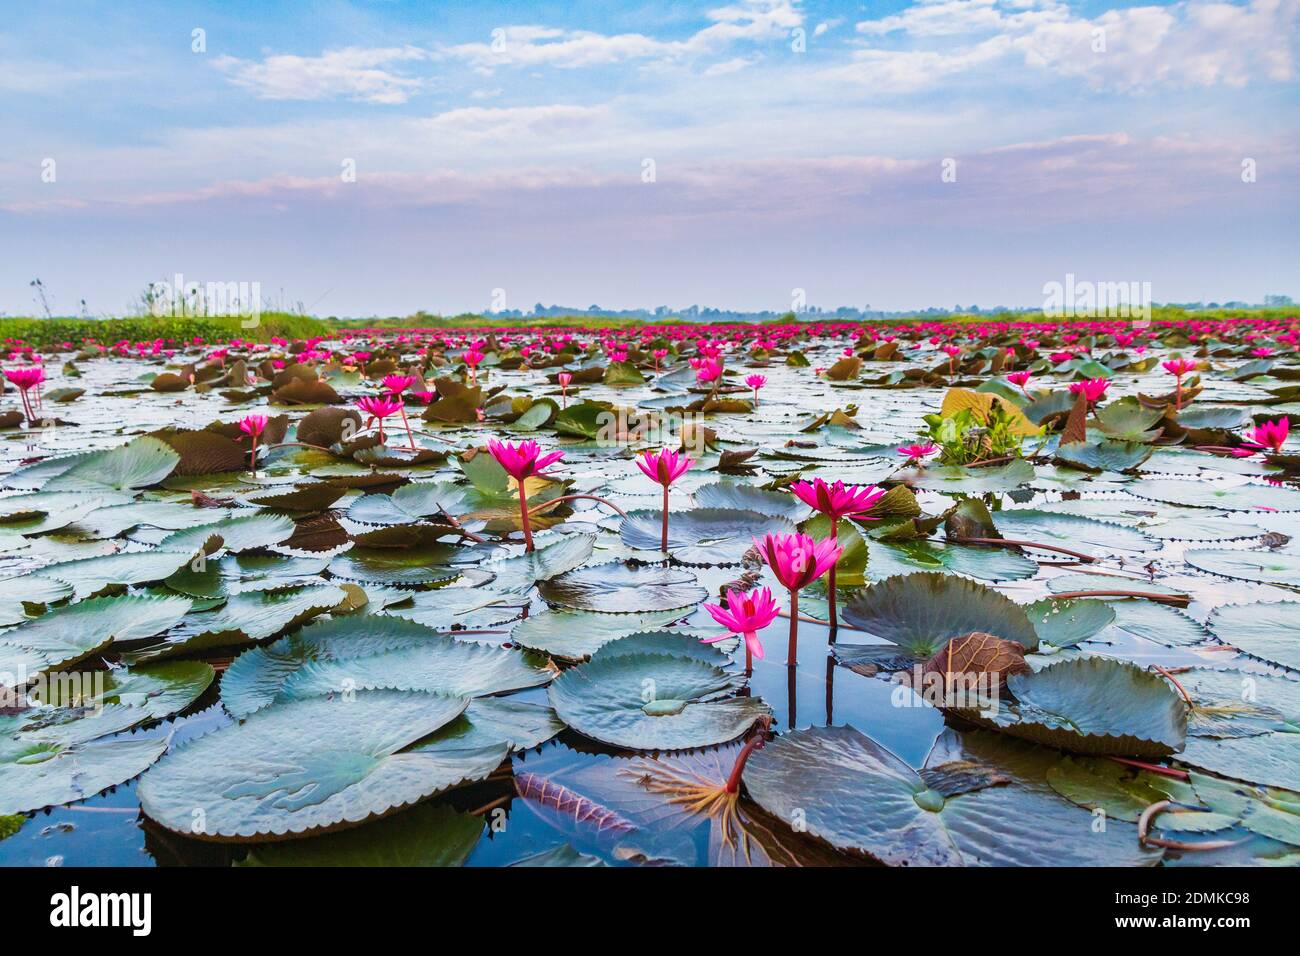 The Sea Of Red Lotus, Lake Nong Harn, Udon Thani, Thailand Stock Photo -  Alamy